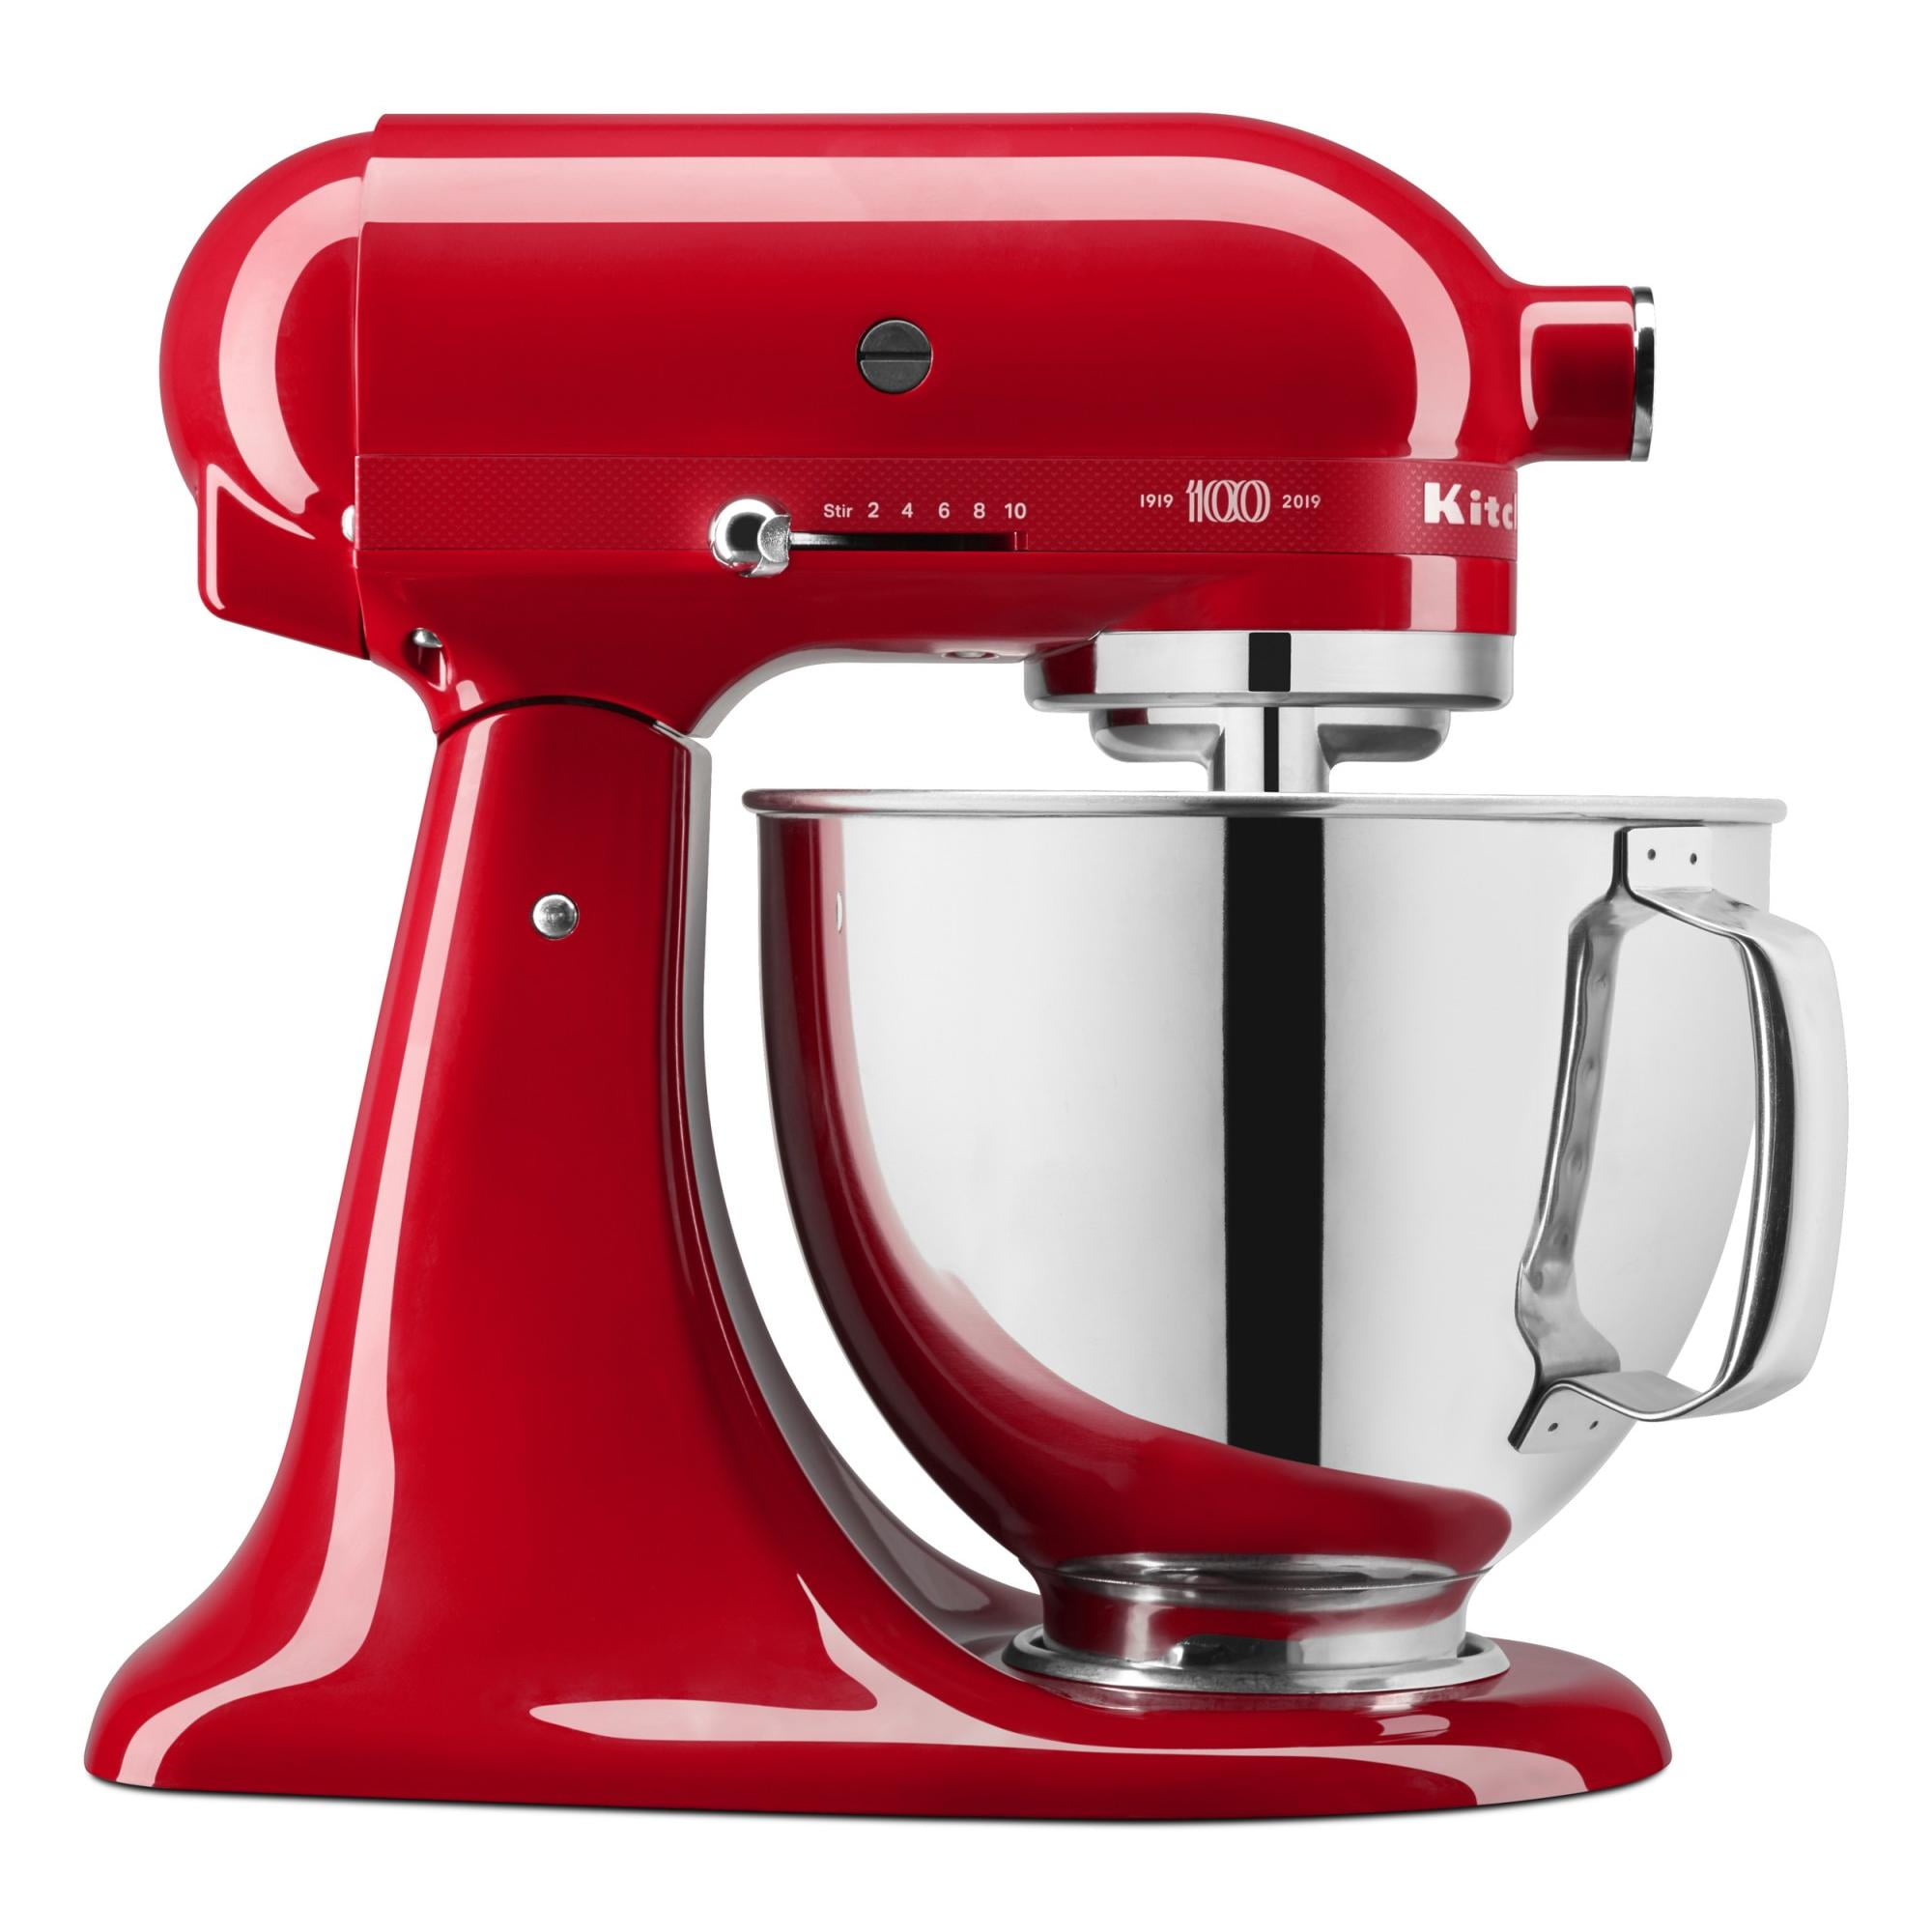 KitchenAid mixers get a lot of love around here (and rightfully so